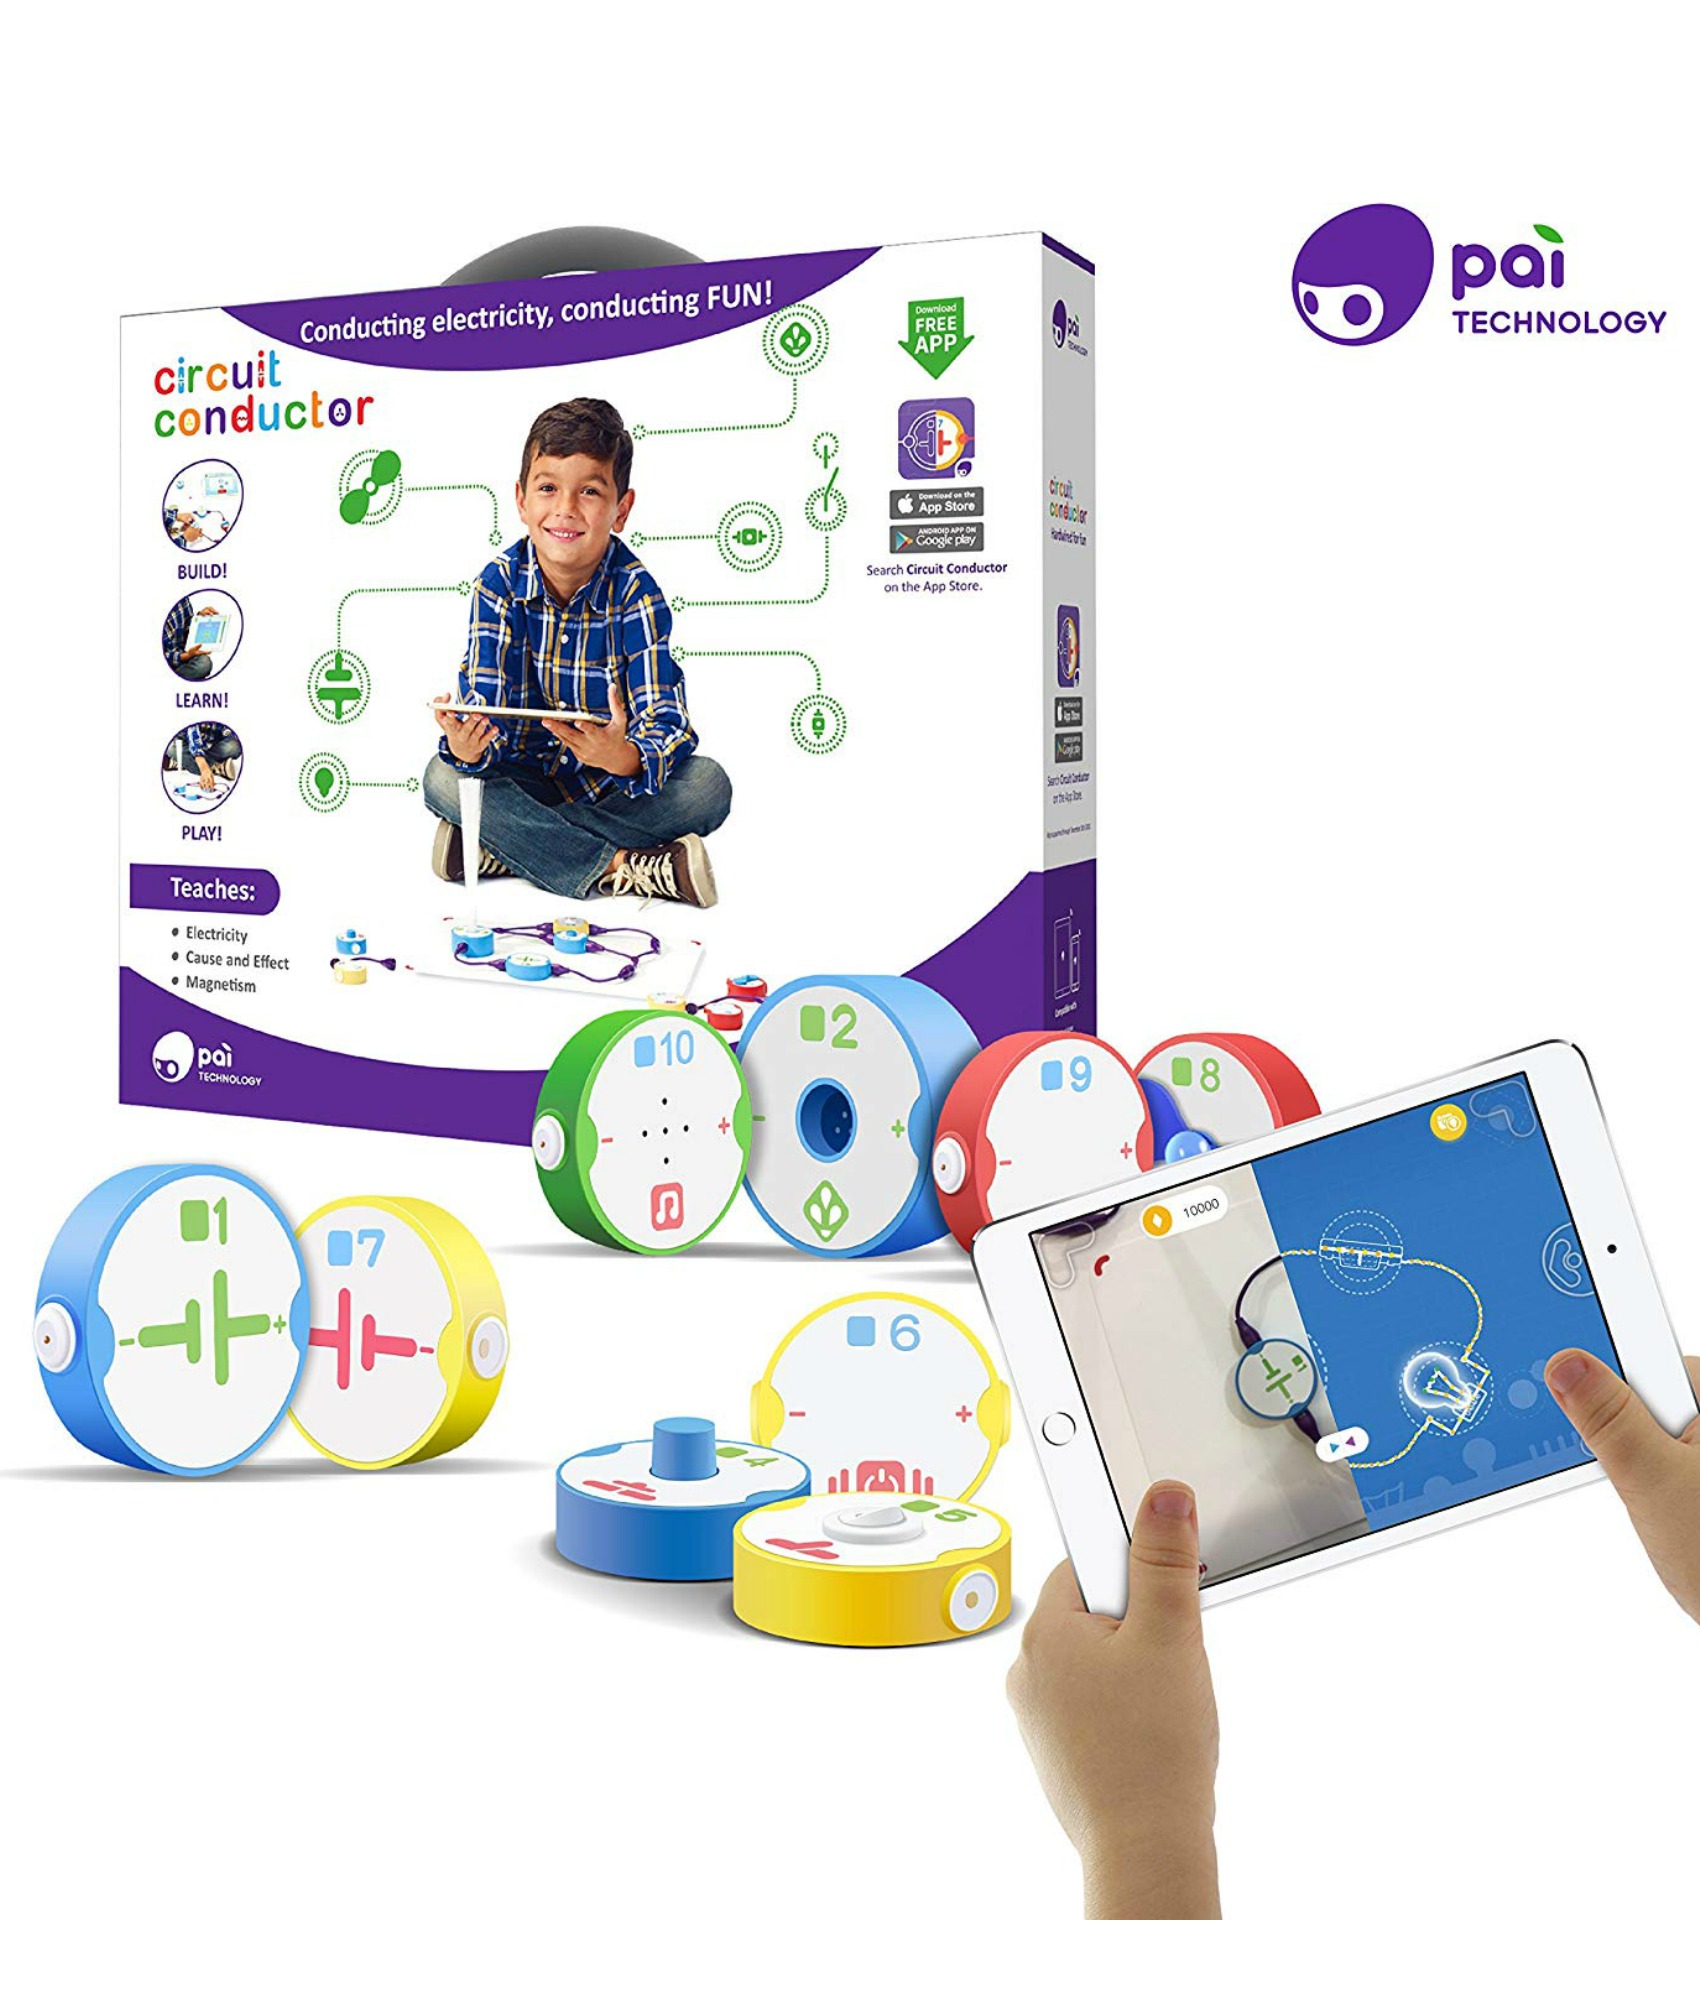 Circuit Conductor toy by Pai Technology | The Coolest Birthday Gifts for 5 year olds